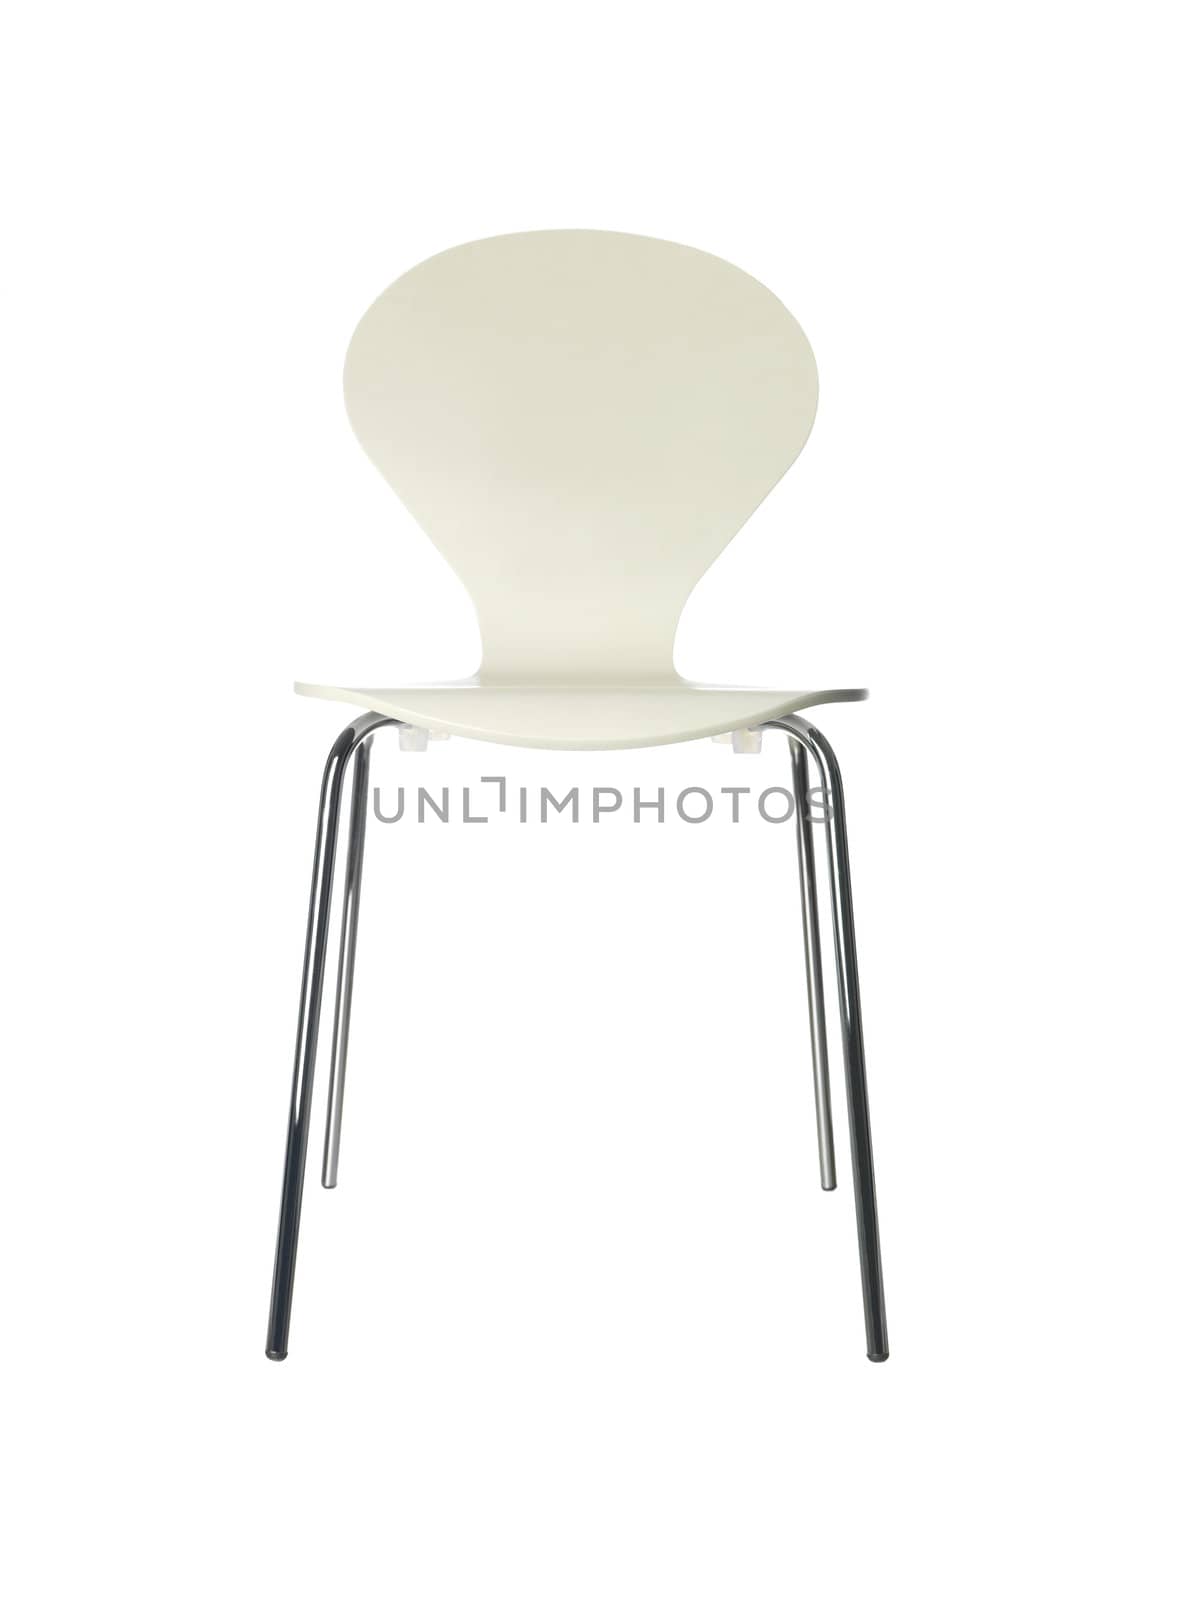 chair against white background